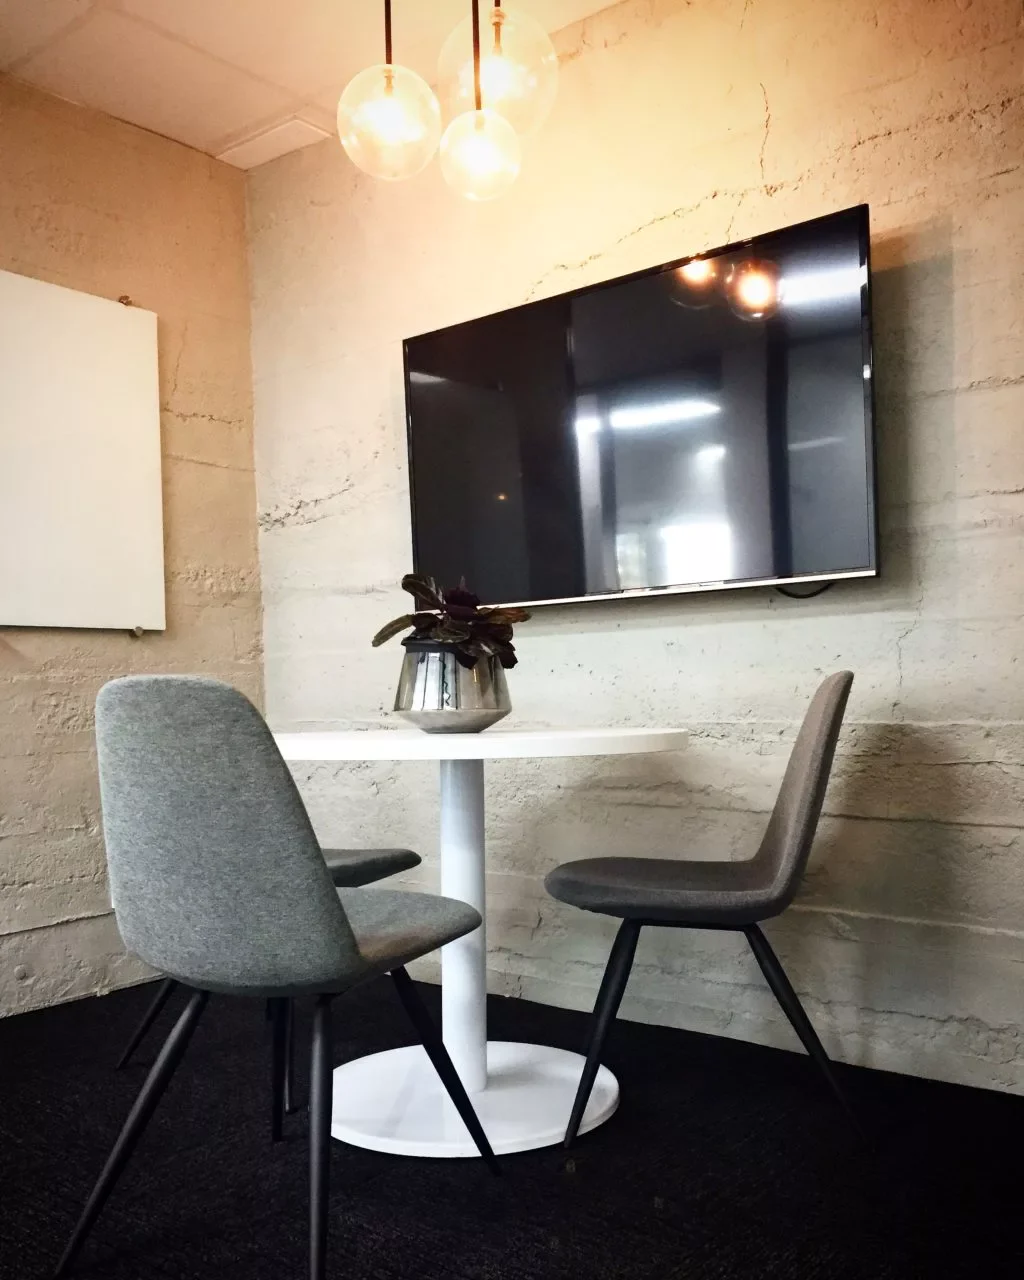 Meeting rooms for all sizes